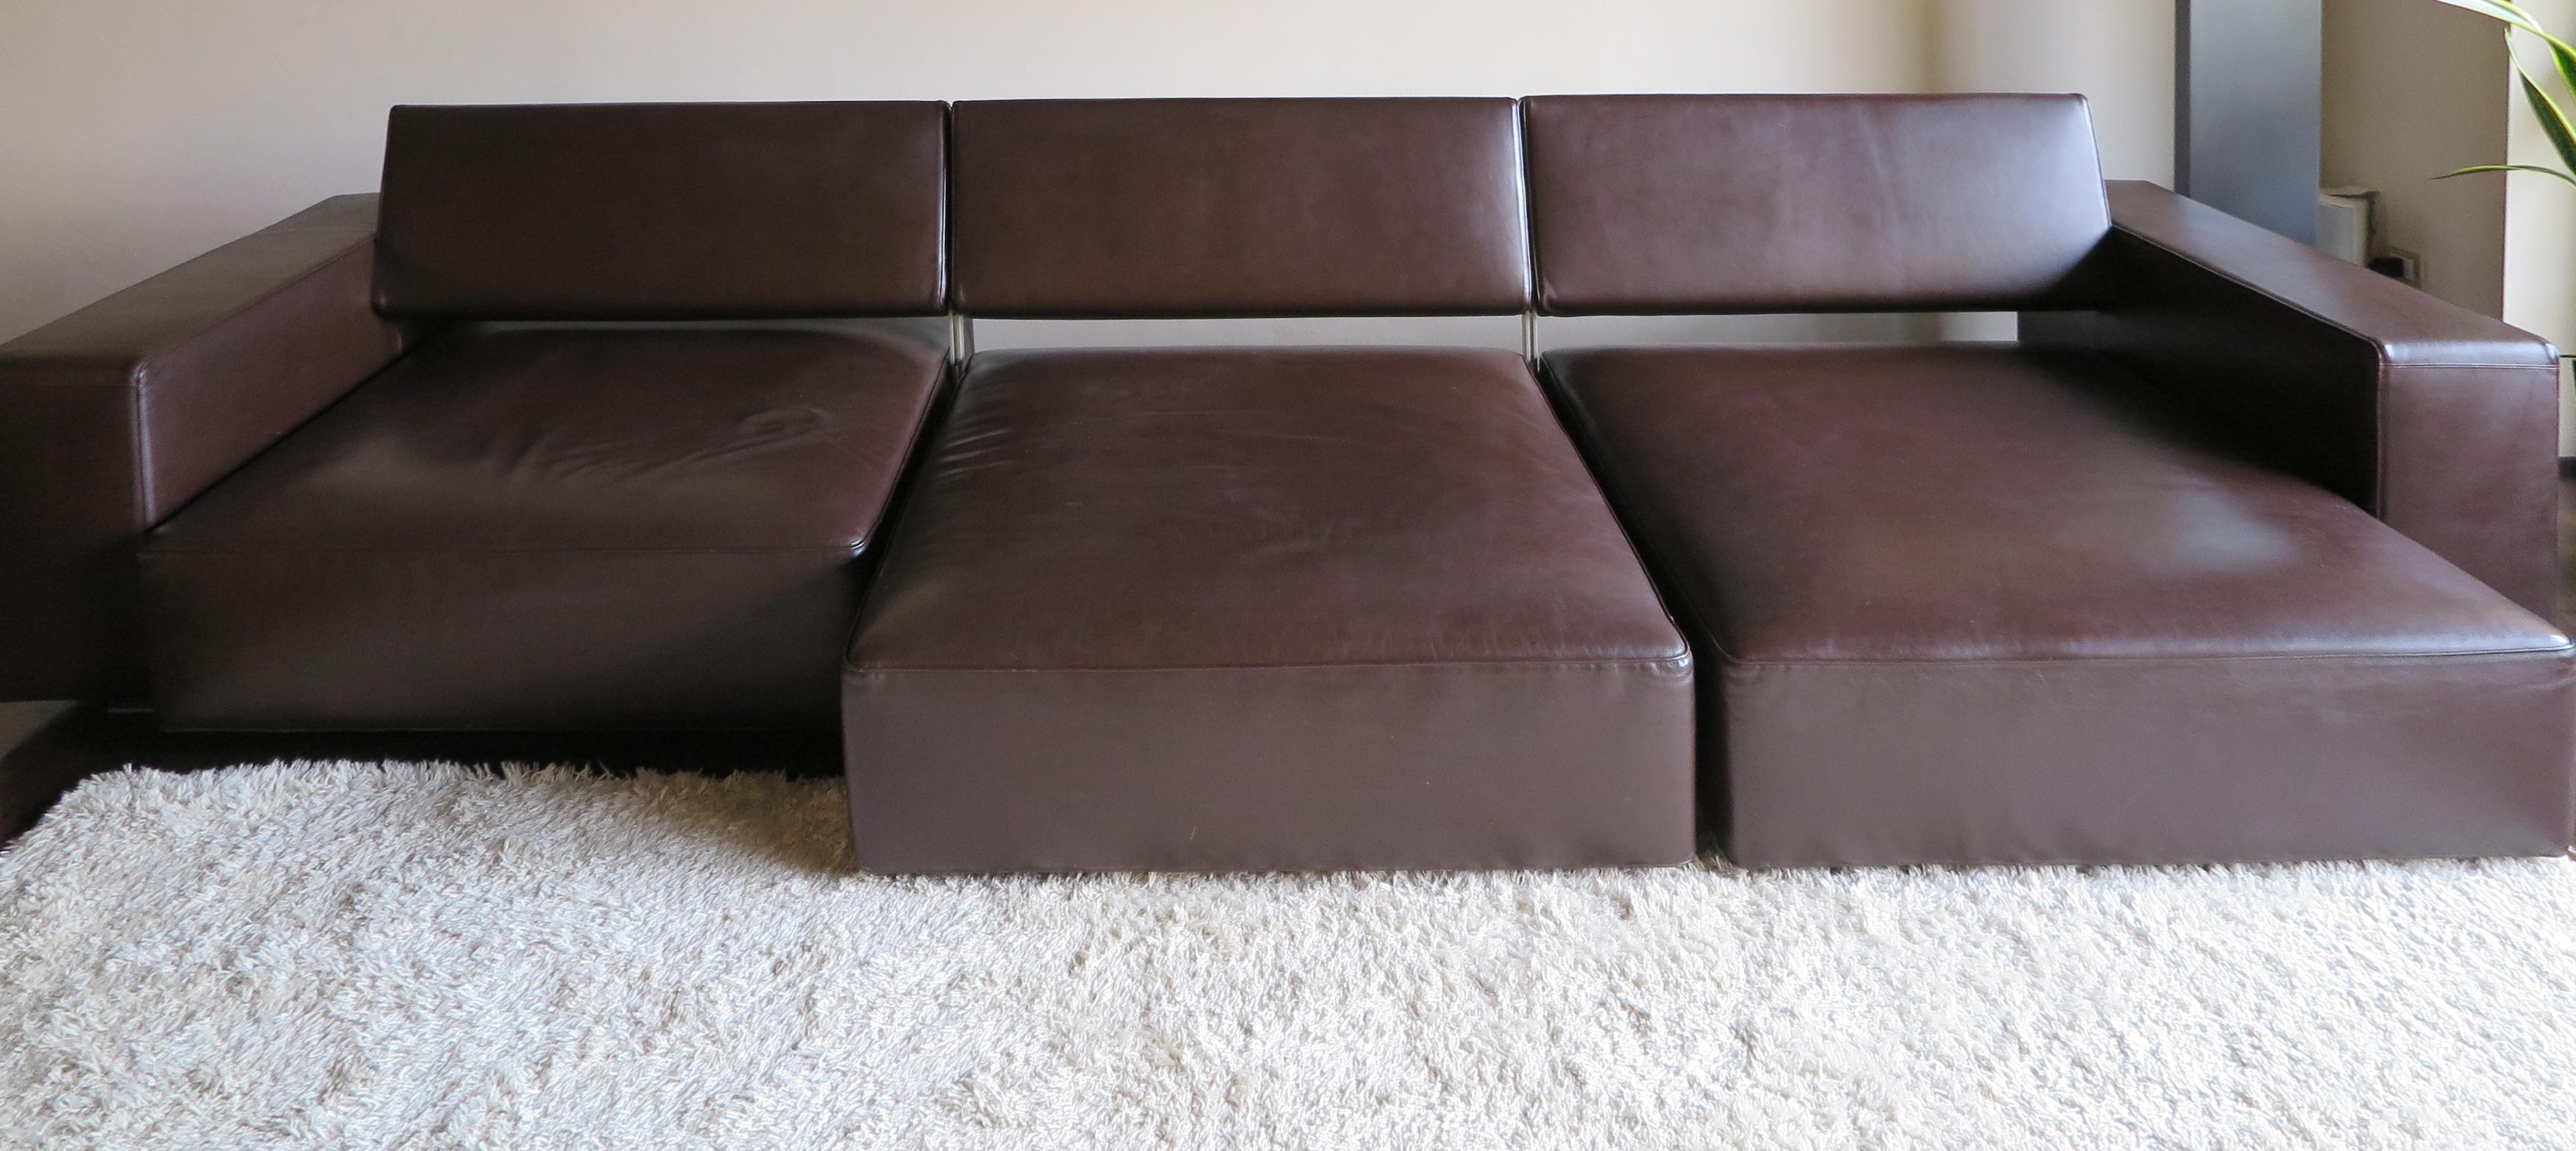 Italian modern leather sofa model Andy designed by Paolo Piva for B&B Italia in 2002.

Internal frame: Tubular steel and steel sections
Internal frame: upholstery Bayfit (Bayer) flexible cold shaped polyurethane foam, polyester fibre